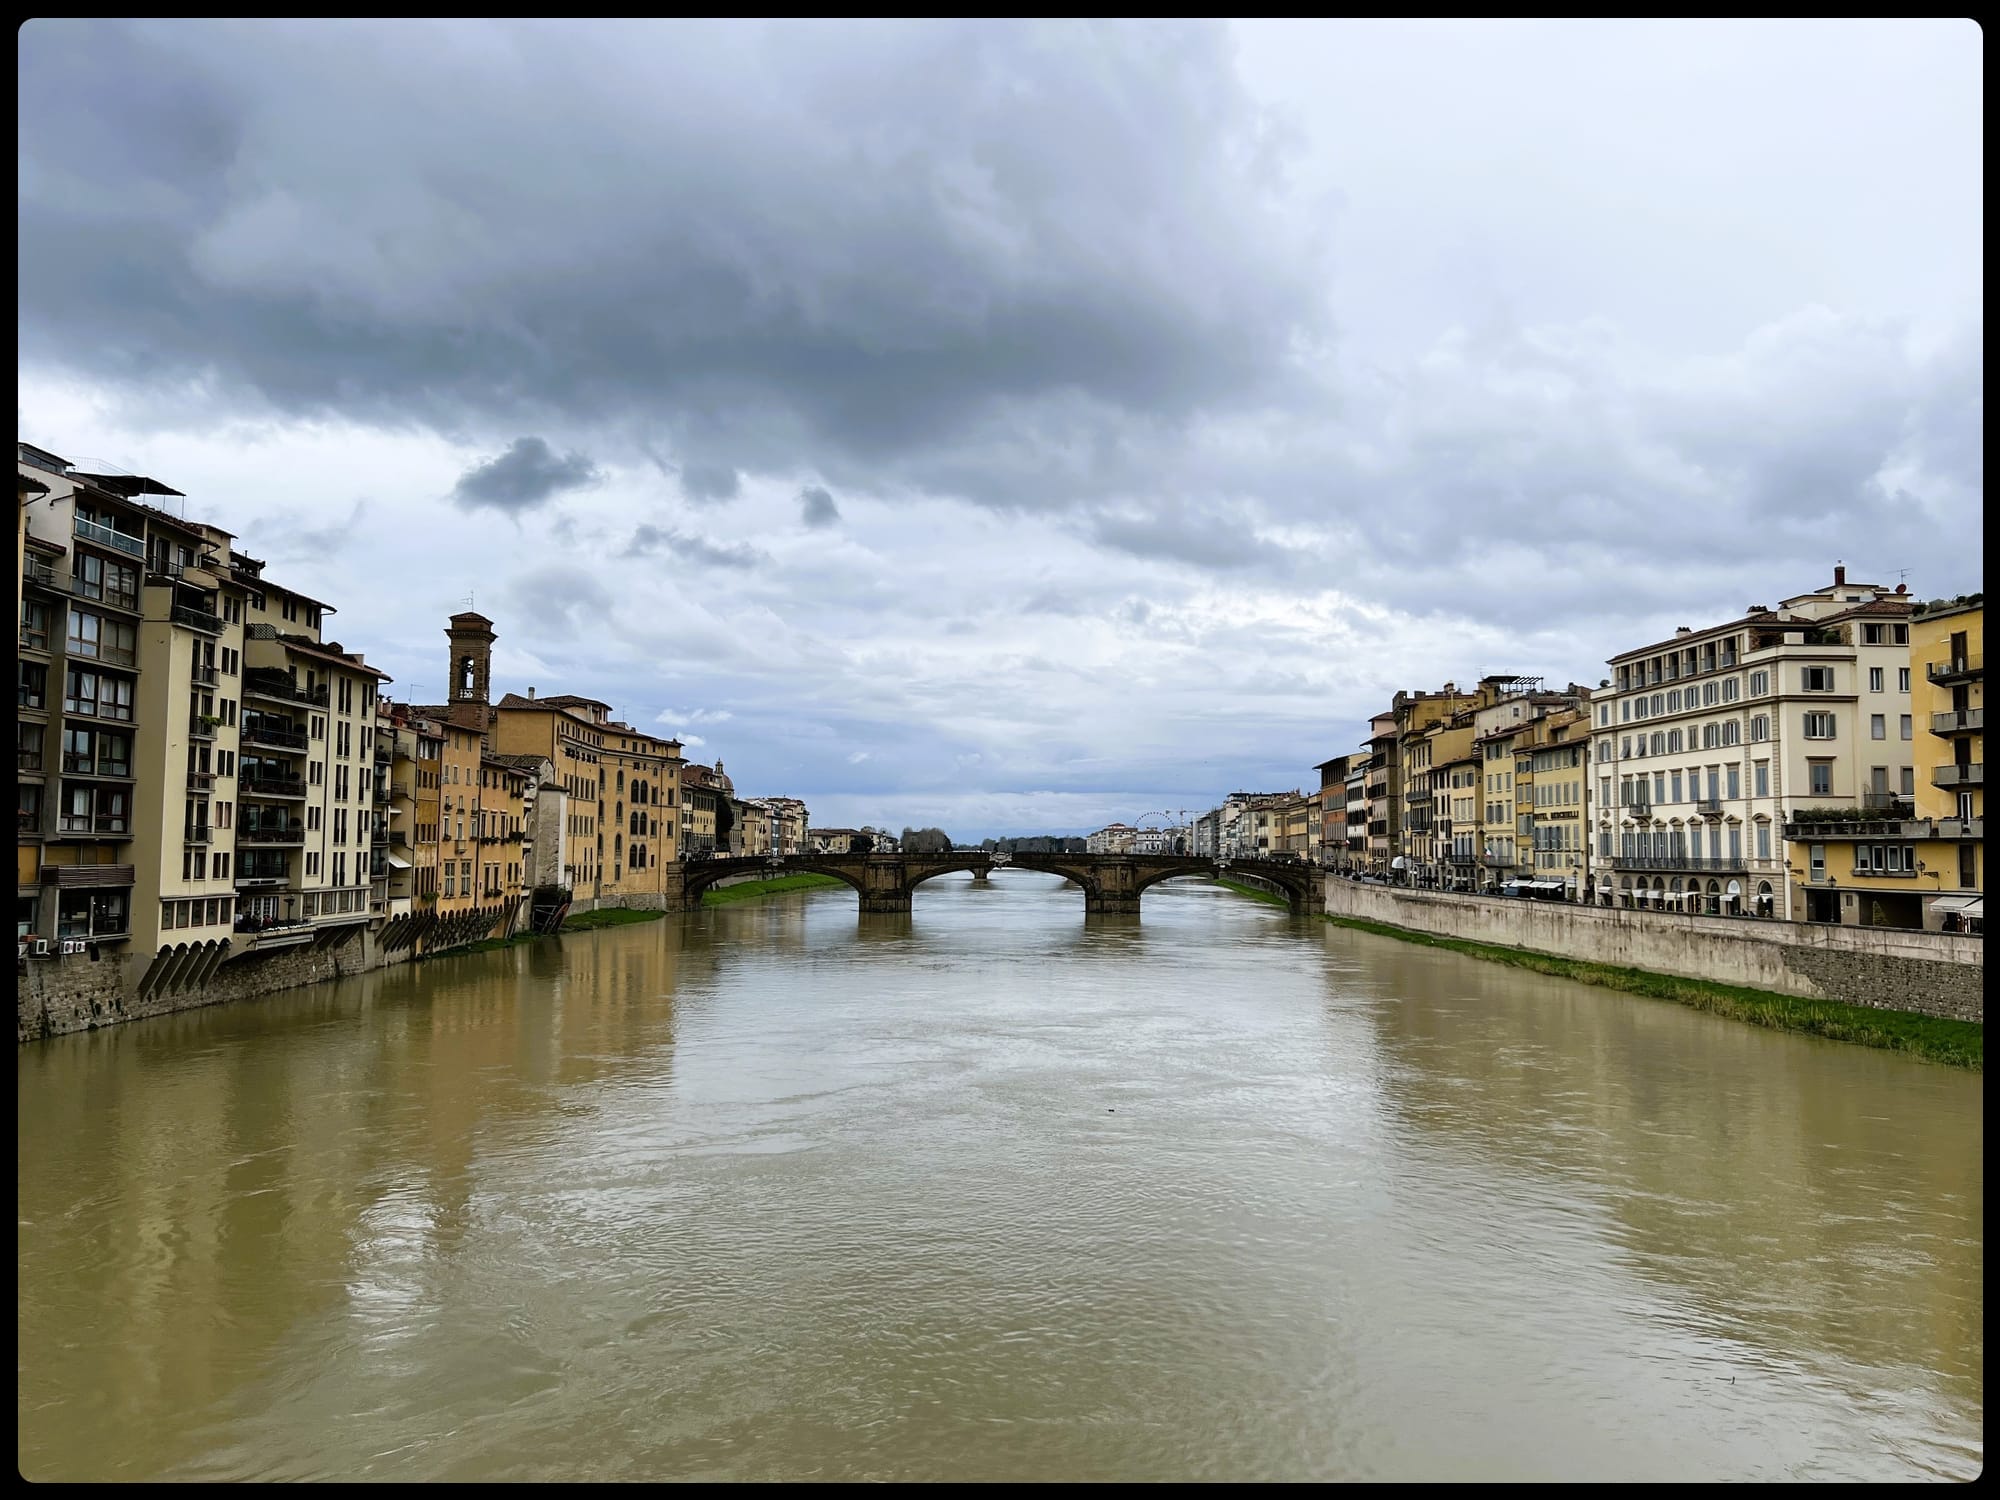 A view of the Ponte Santa Trinita over the Arno in Florence showing buildings on either side and the river in the center. Several days of rain had turned the river brown.